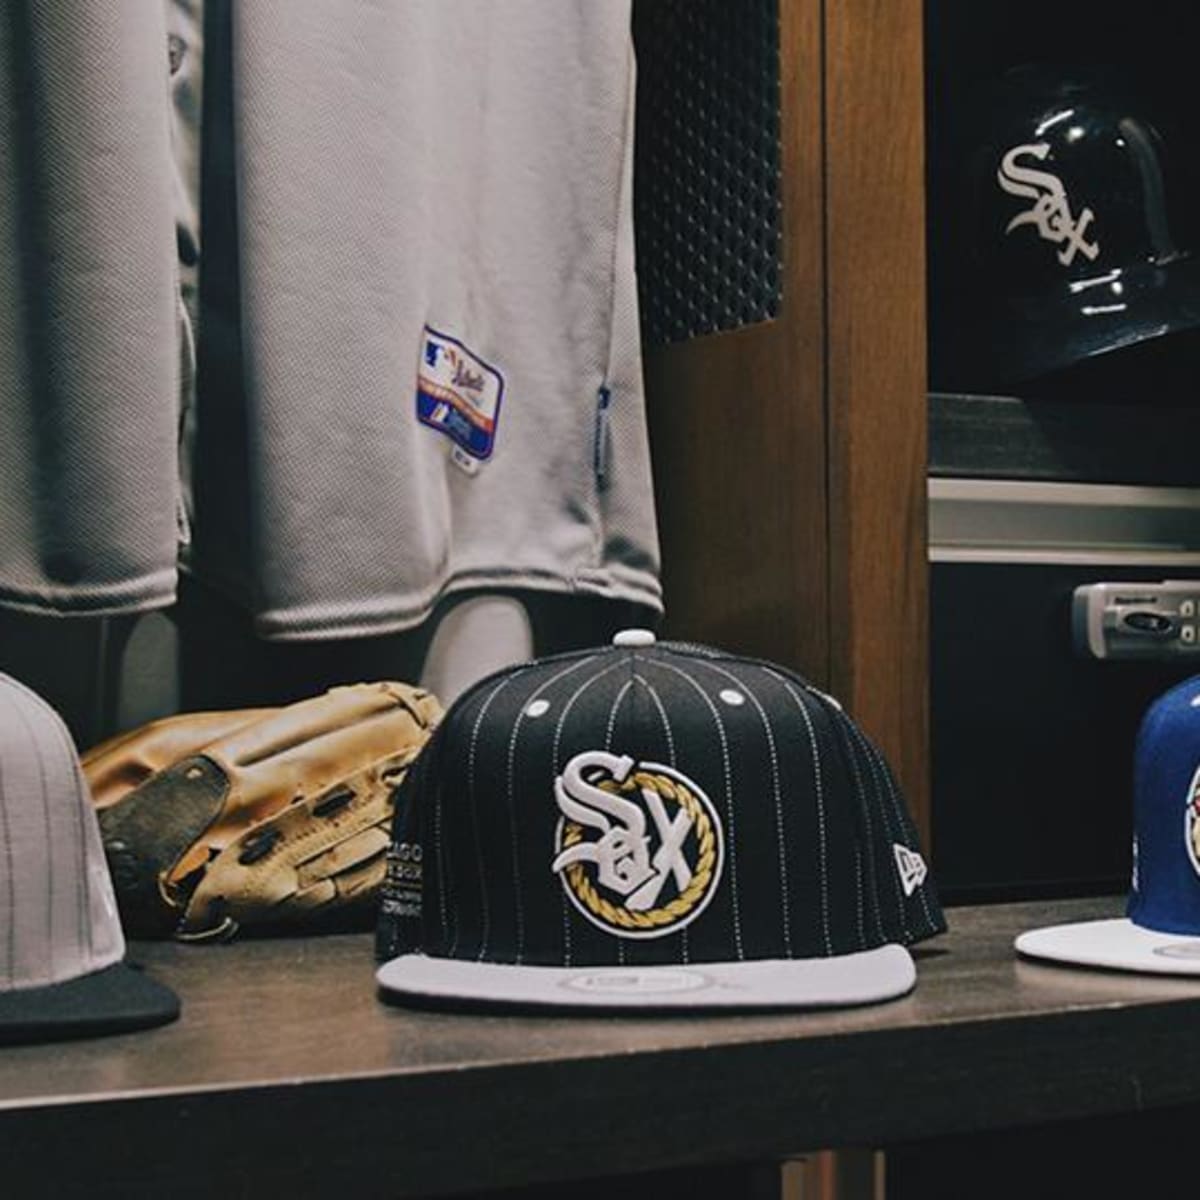 Chance The Rapper designed new White Sox hats - Sports Illustrated